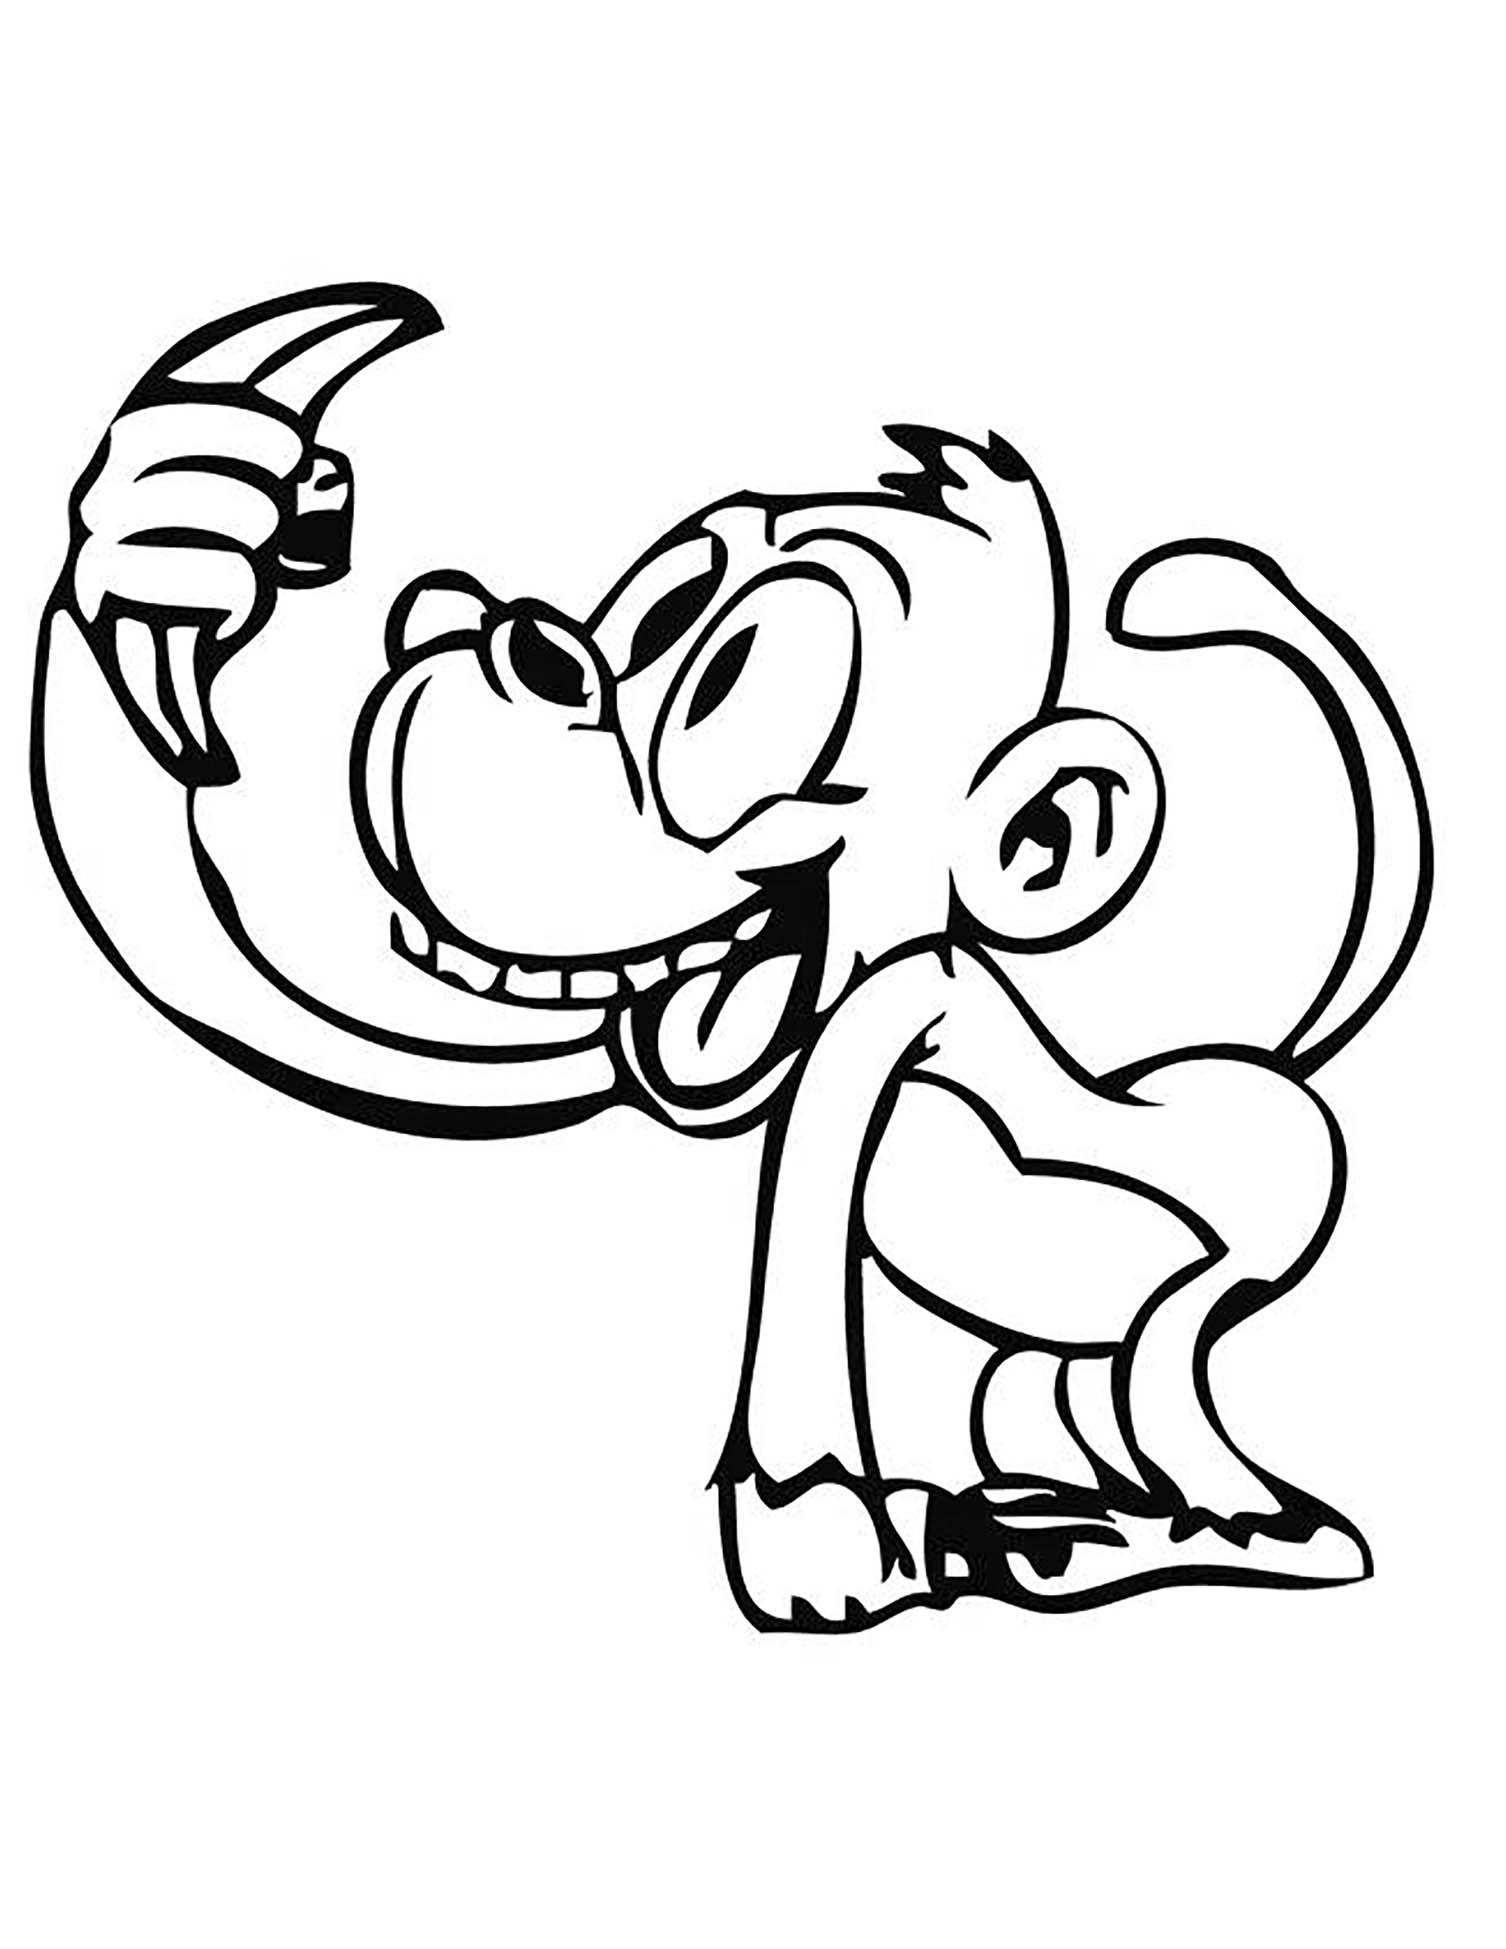 Incredible Monkeys coloring page to print and color for free